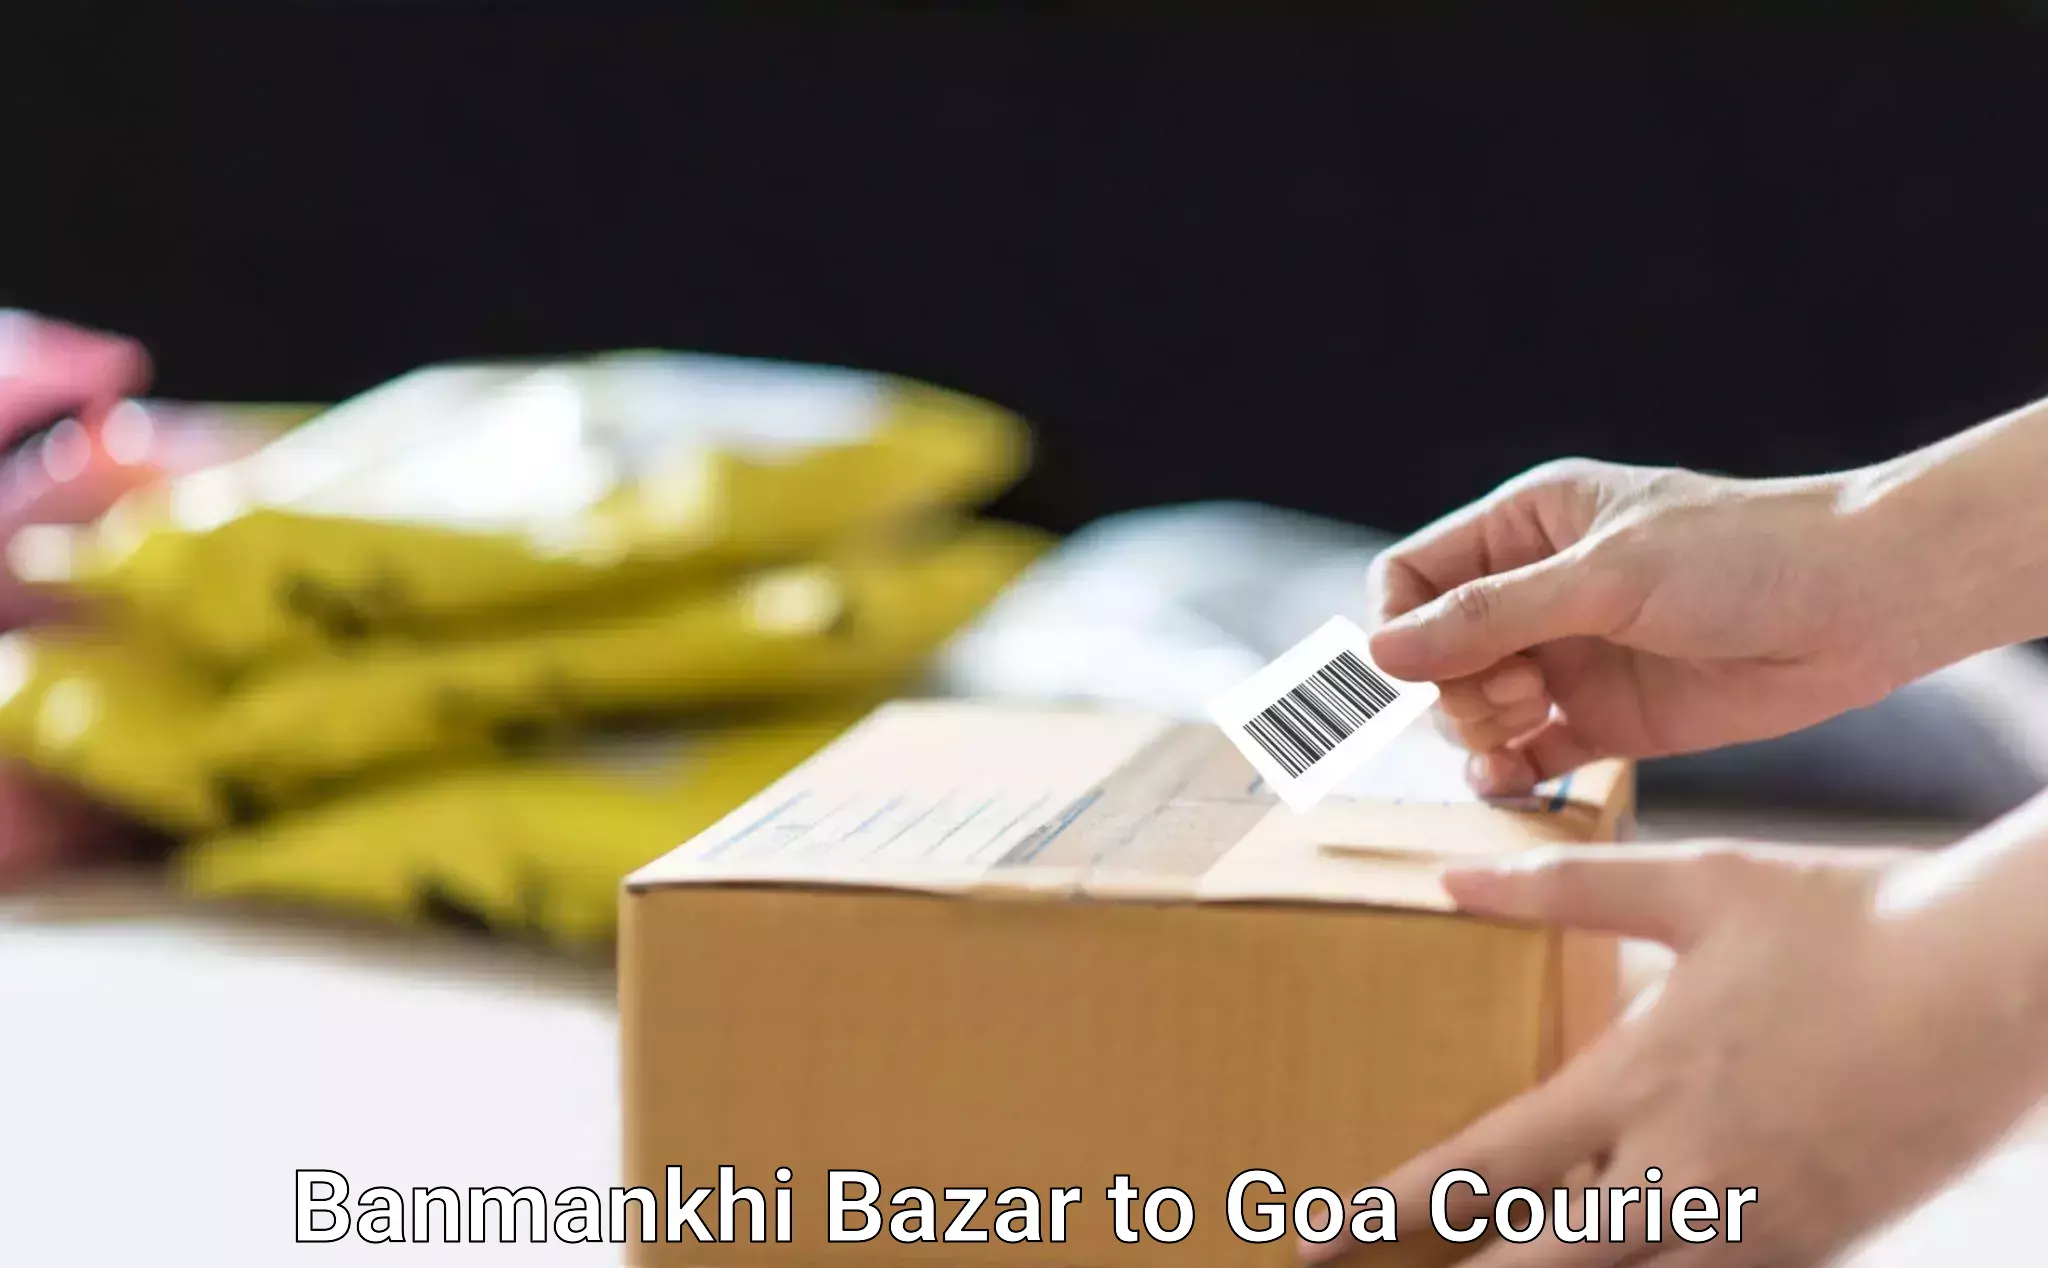 Quality moving services in Banmankhi Bazar to Goa